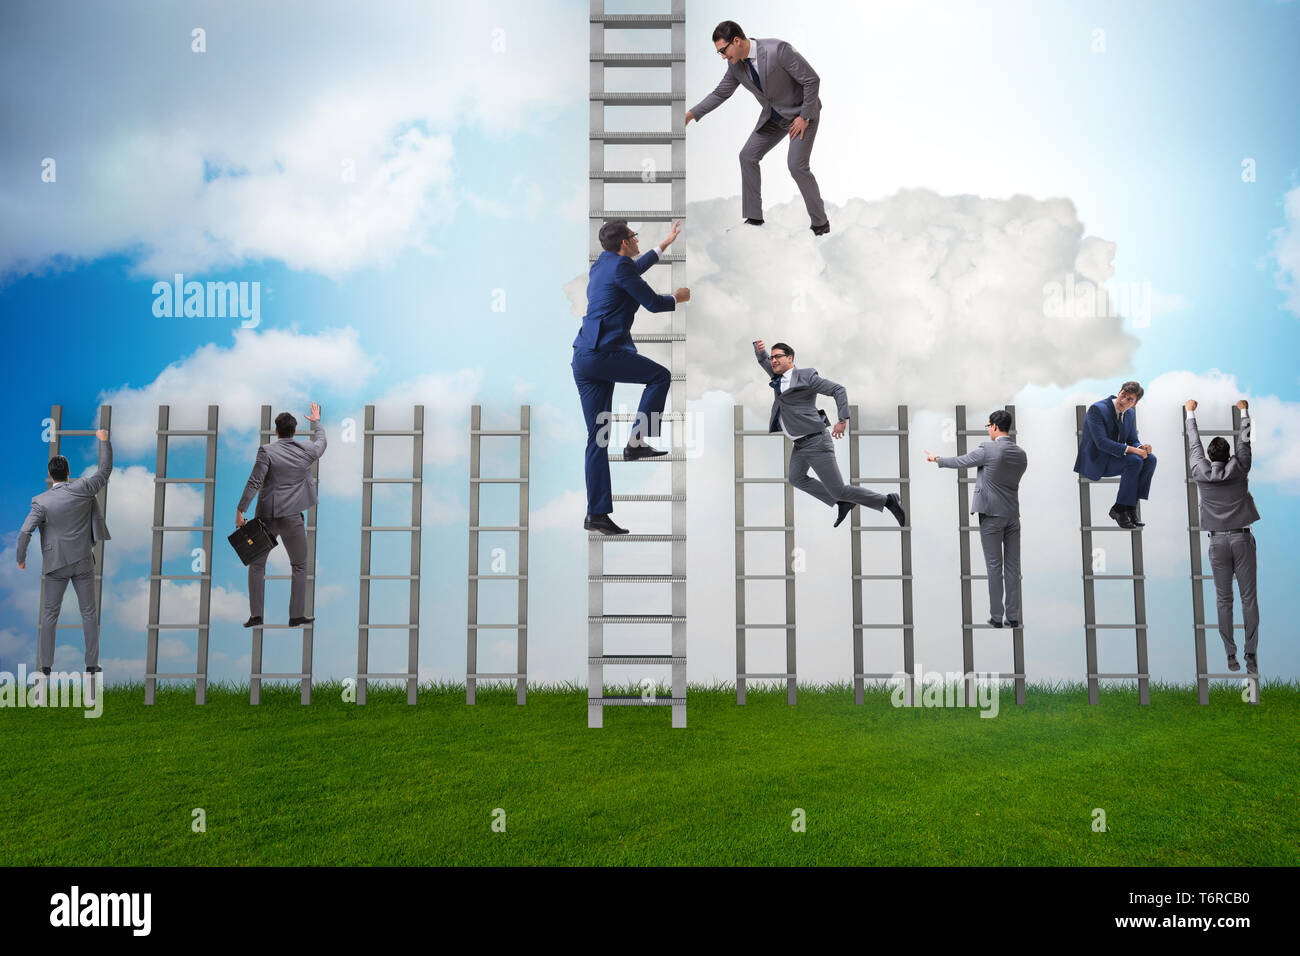 Concept of mentorship in business and career progression Stock Photo